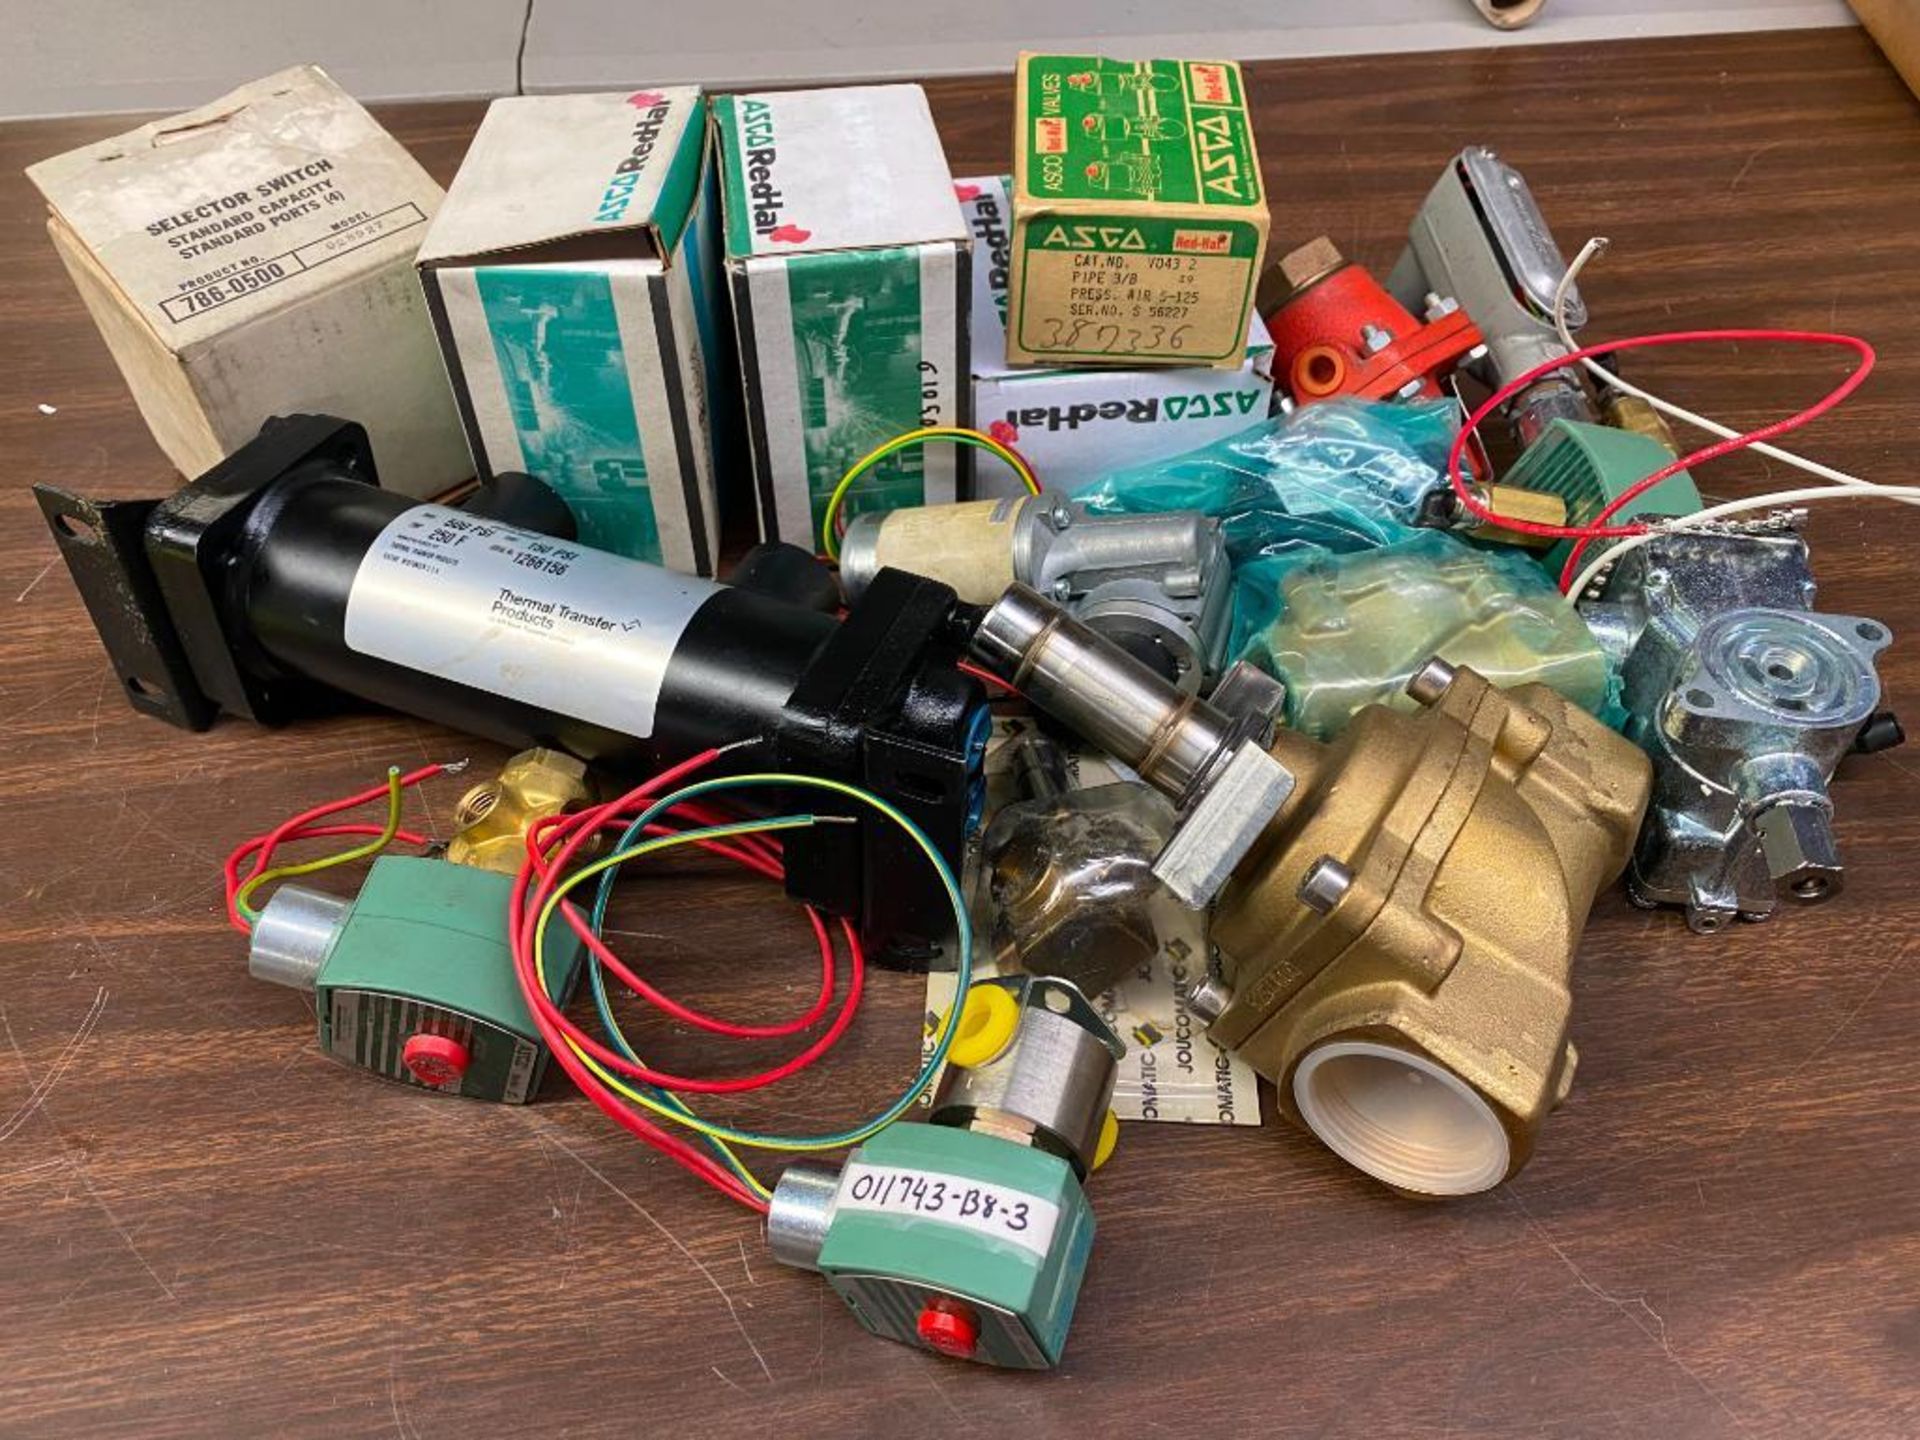 LOT OF MISCELLANEOUS PARTS/ACTUATORS. Packaging Fee = $10